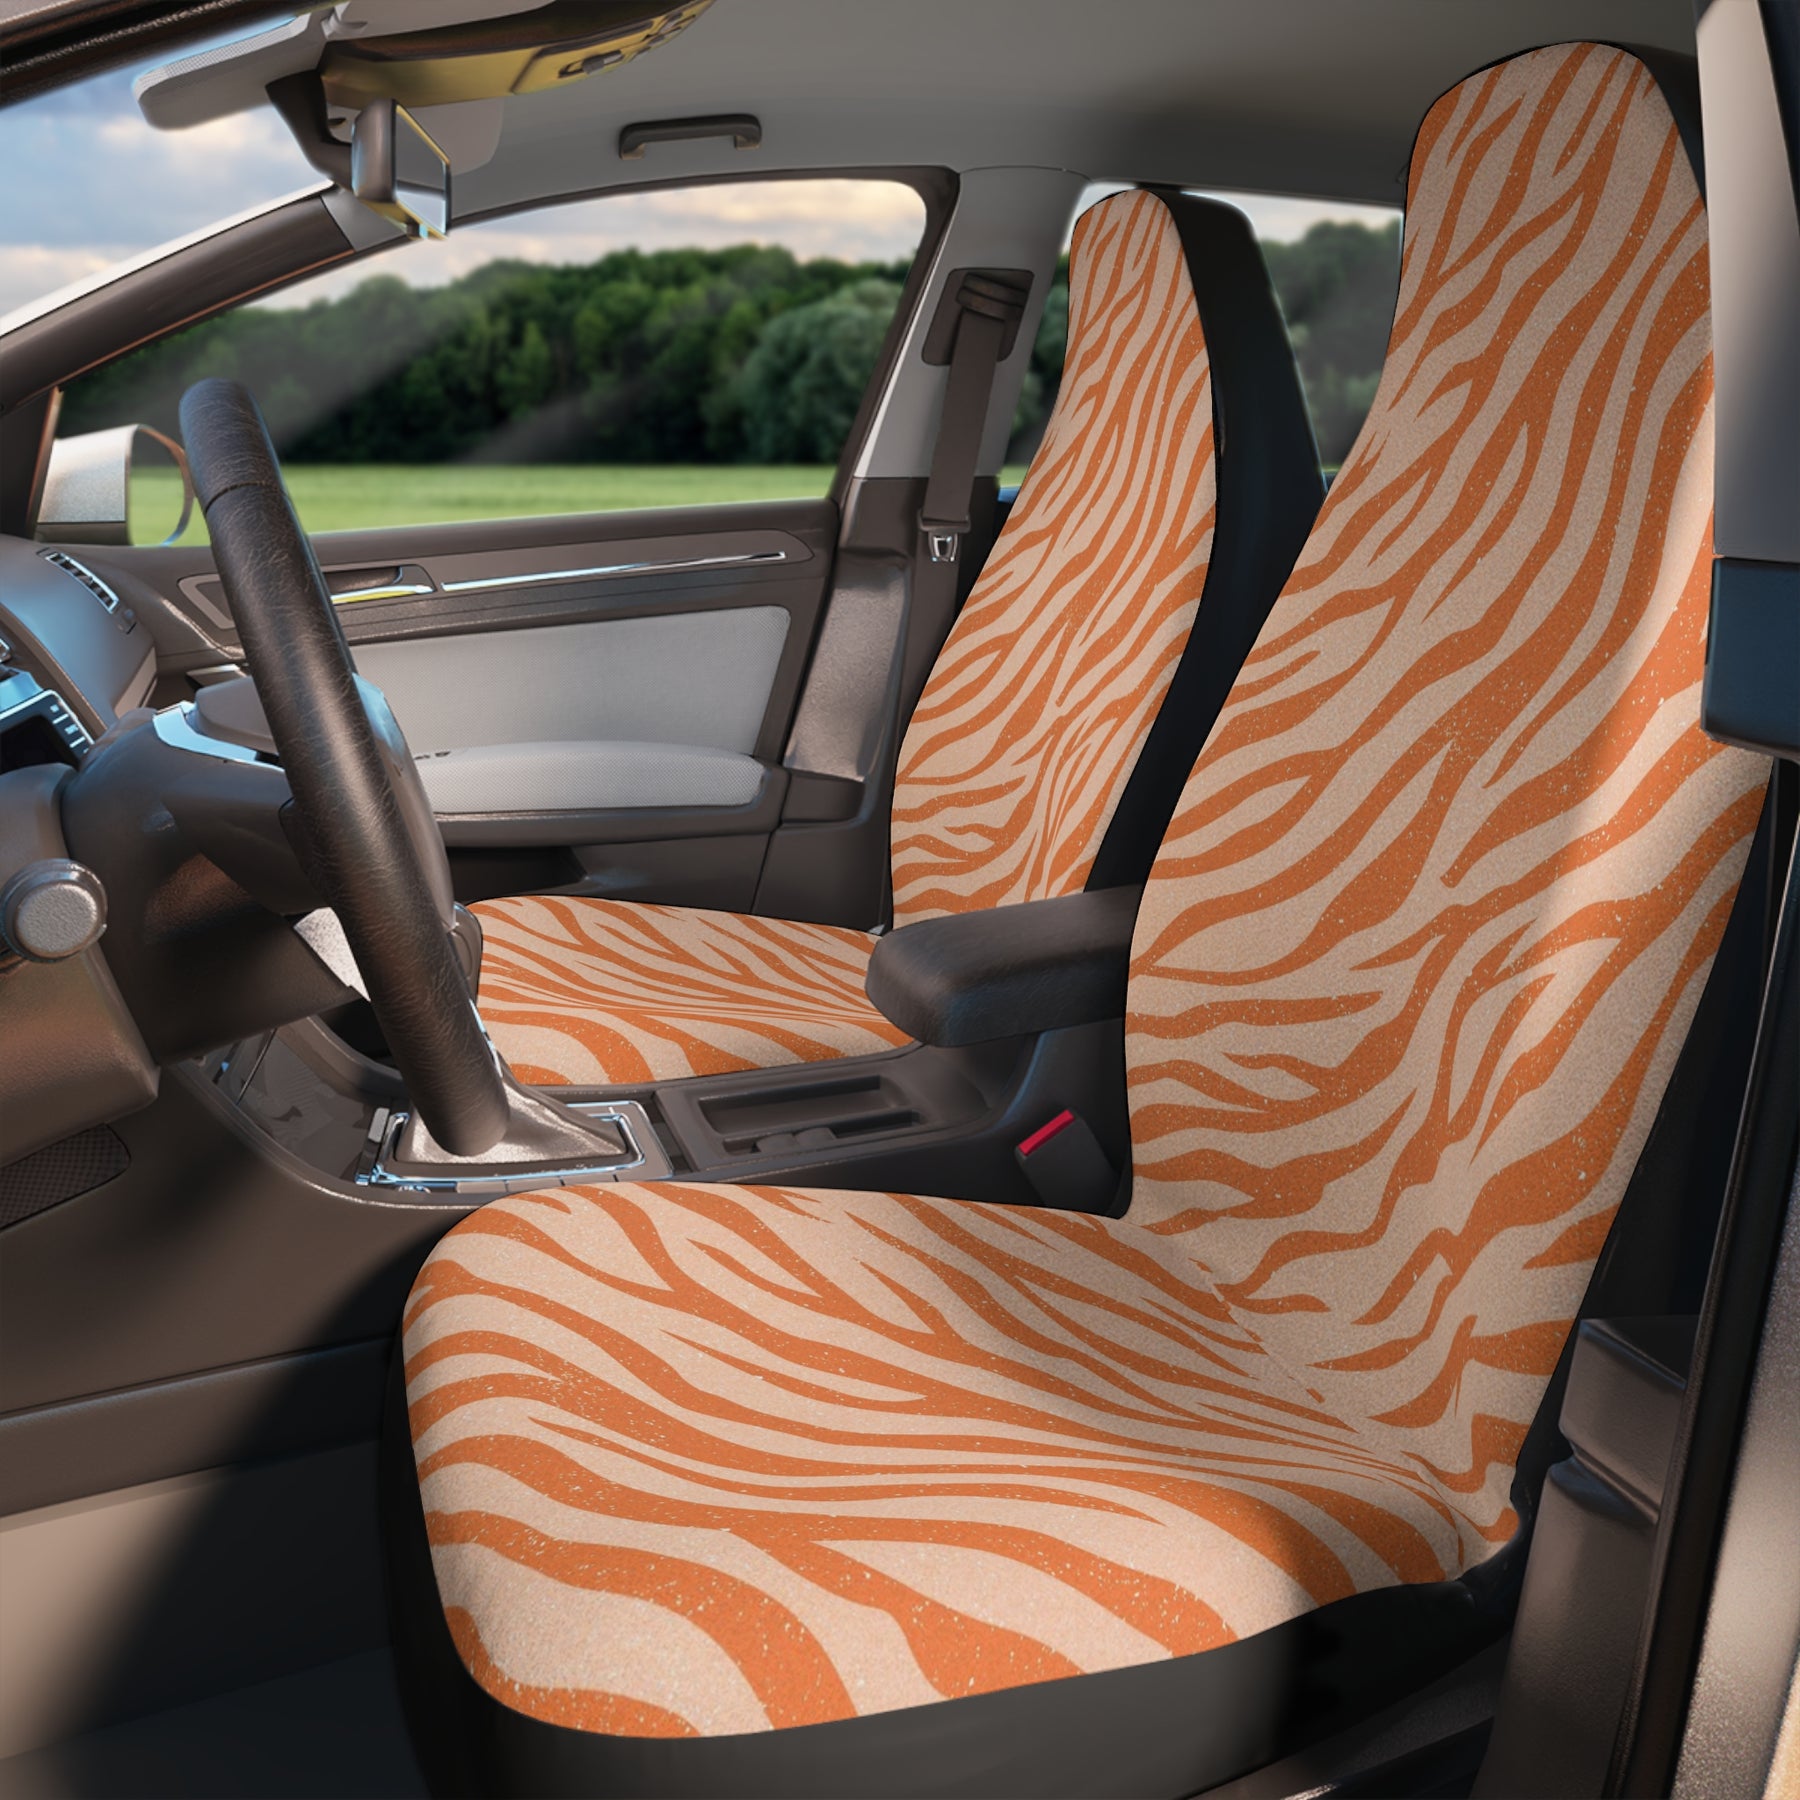 Retro Groovy Waves Boho Car Seat Covers Set, Tiger Print Aesthetic Car Seat Cover, Gift for new driver,Good vibes cute car seat decor